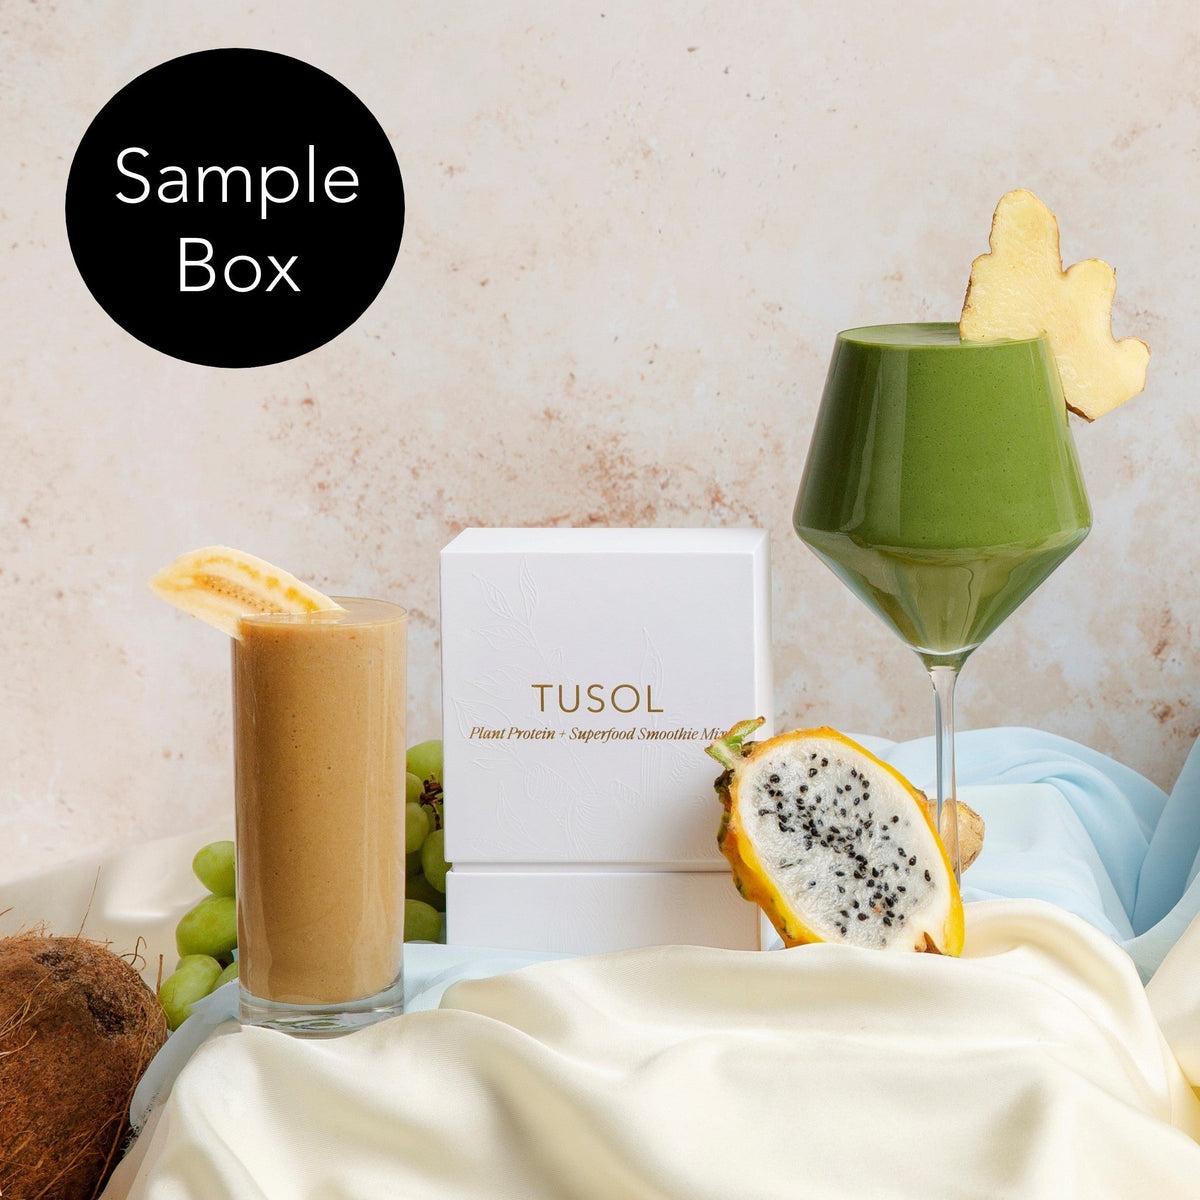 http://yourmultiverse.com/cdn/shop/products/tusol-organic-plant-protein-superfood-smoothie-mix-sample-box-293072_1200x1200.jpg?v=1642555231